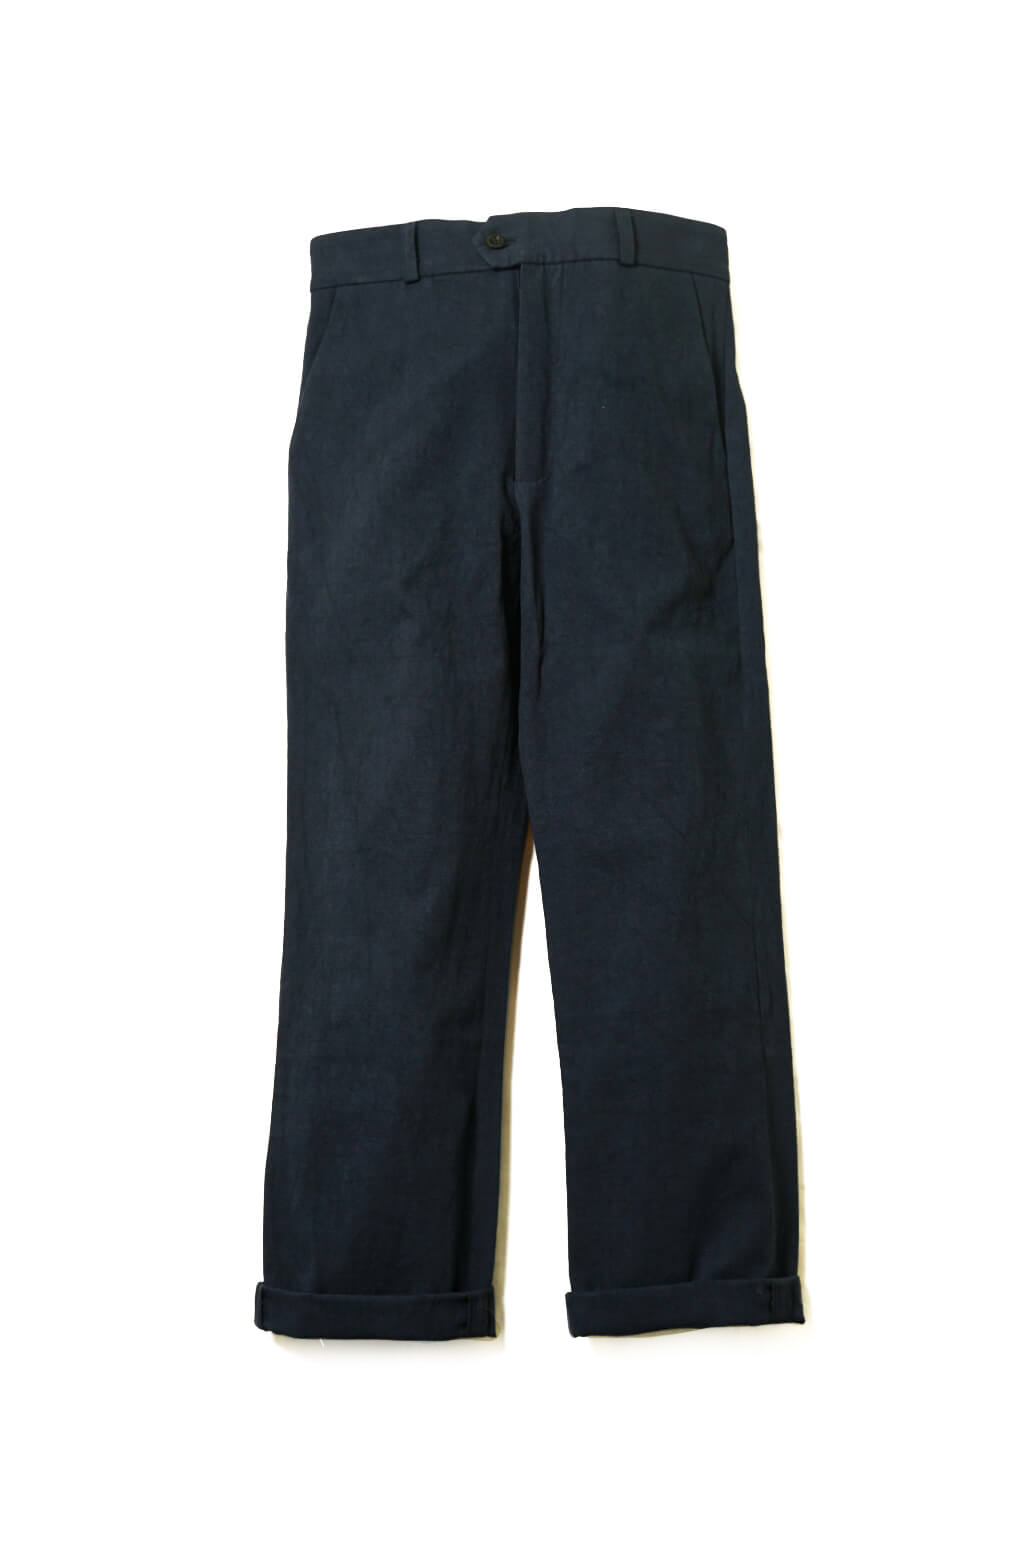 ARCHIVE EDITION TROUSERS